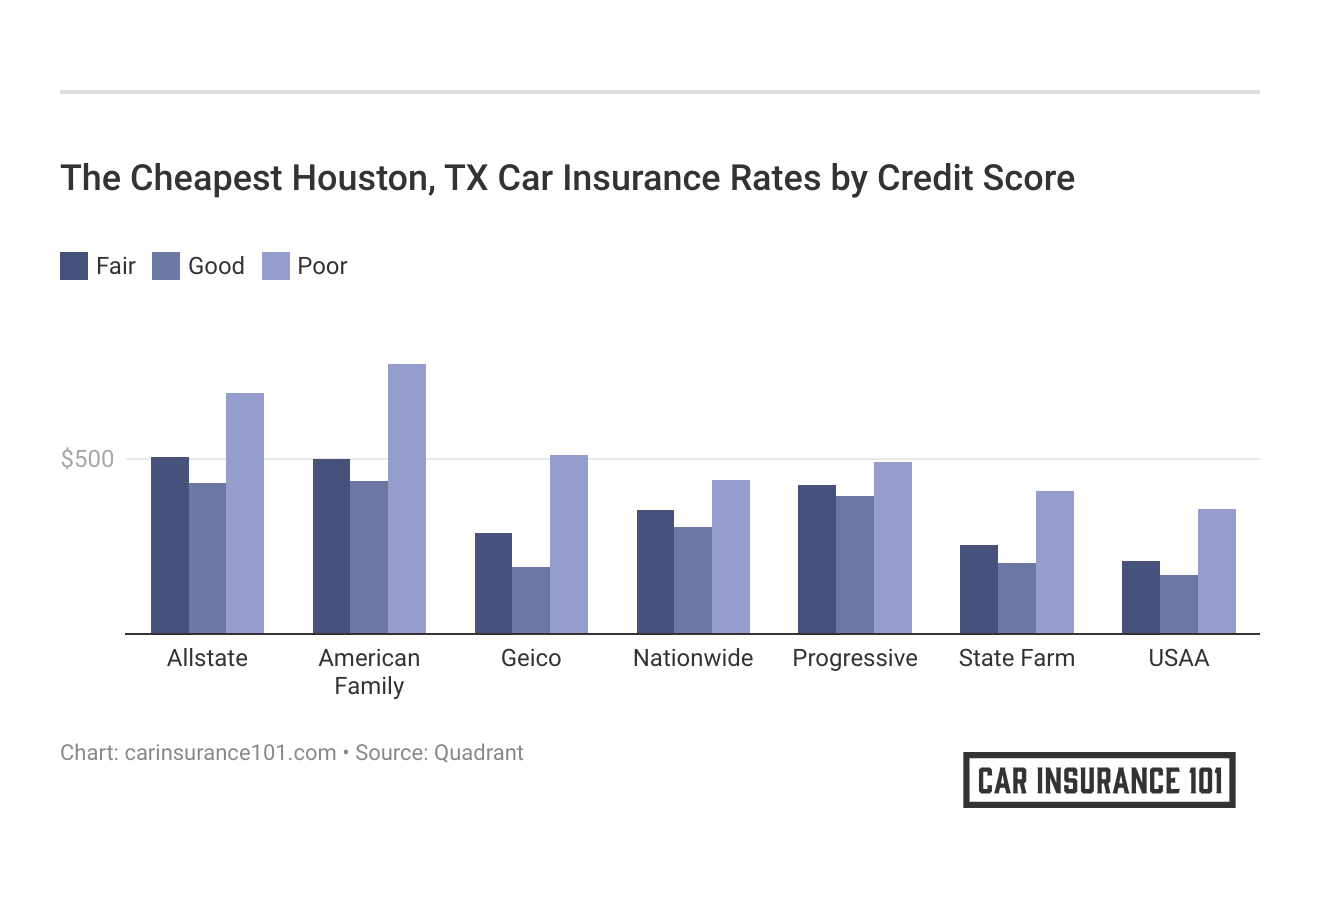 <h3>The Cheapest Houston, TX Car Insurance Rates by Credit Score</h3>